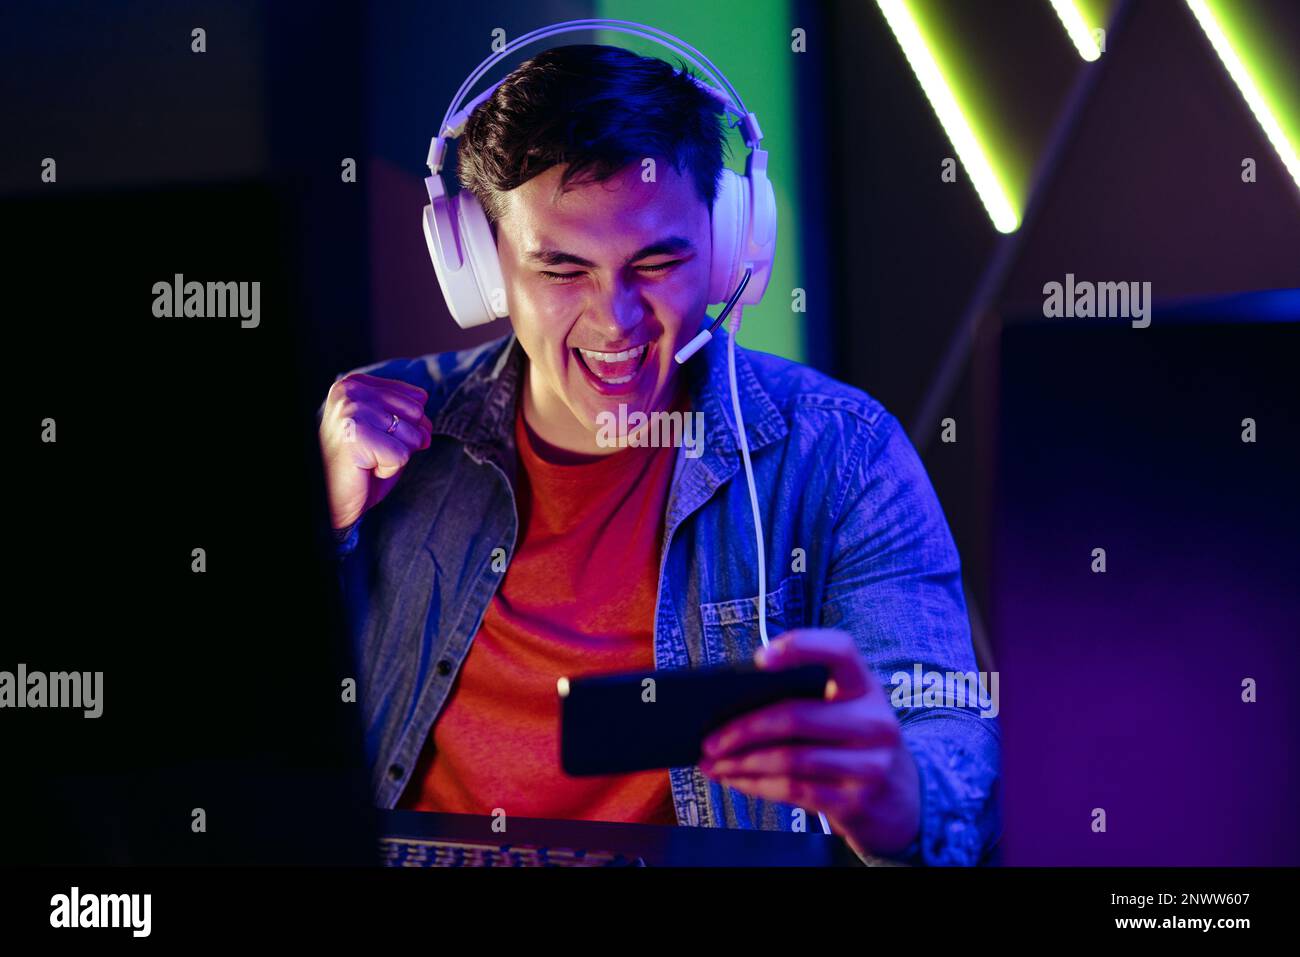 Male video game player cheering and celebrating as he streams a live broadcast of a game on his smartphone. Young man joining an online audience in wa Stock Photo